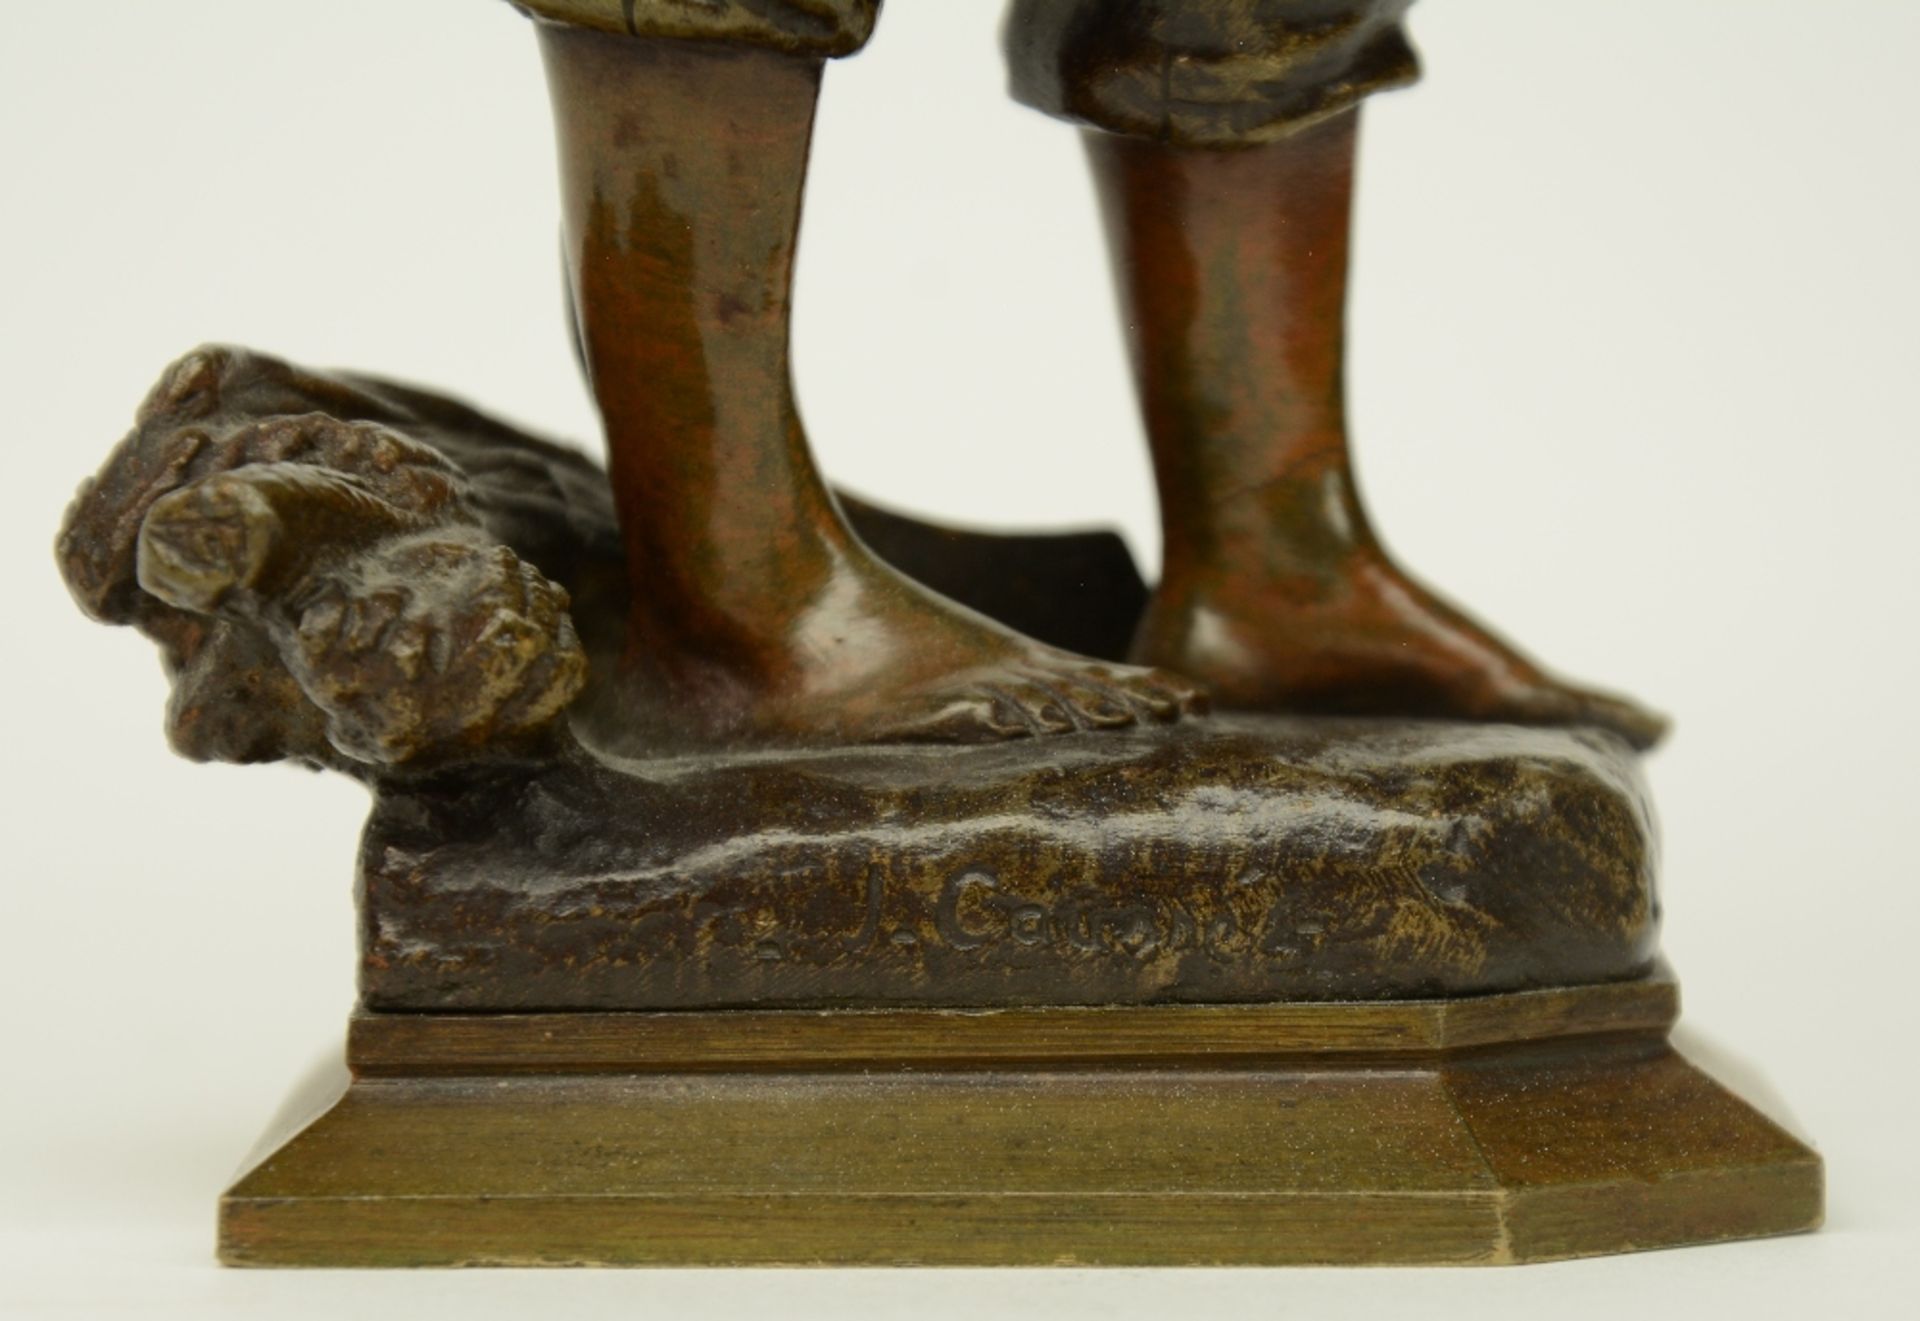 Causse J., patinated bronze sculpture depicting a mower, H 20 cm - Image 7 of 7